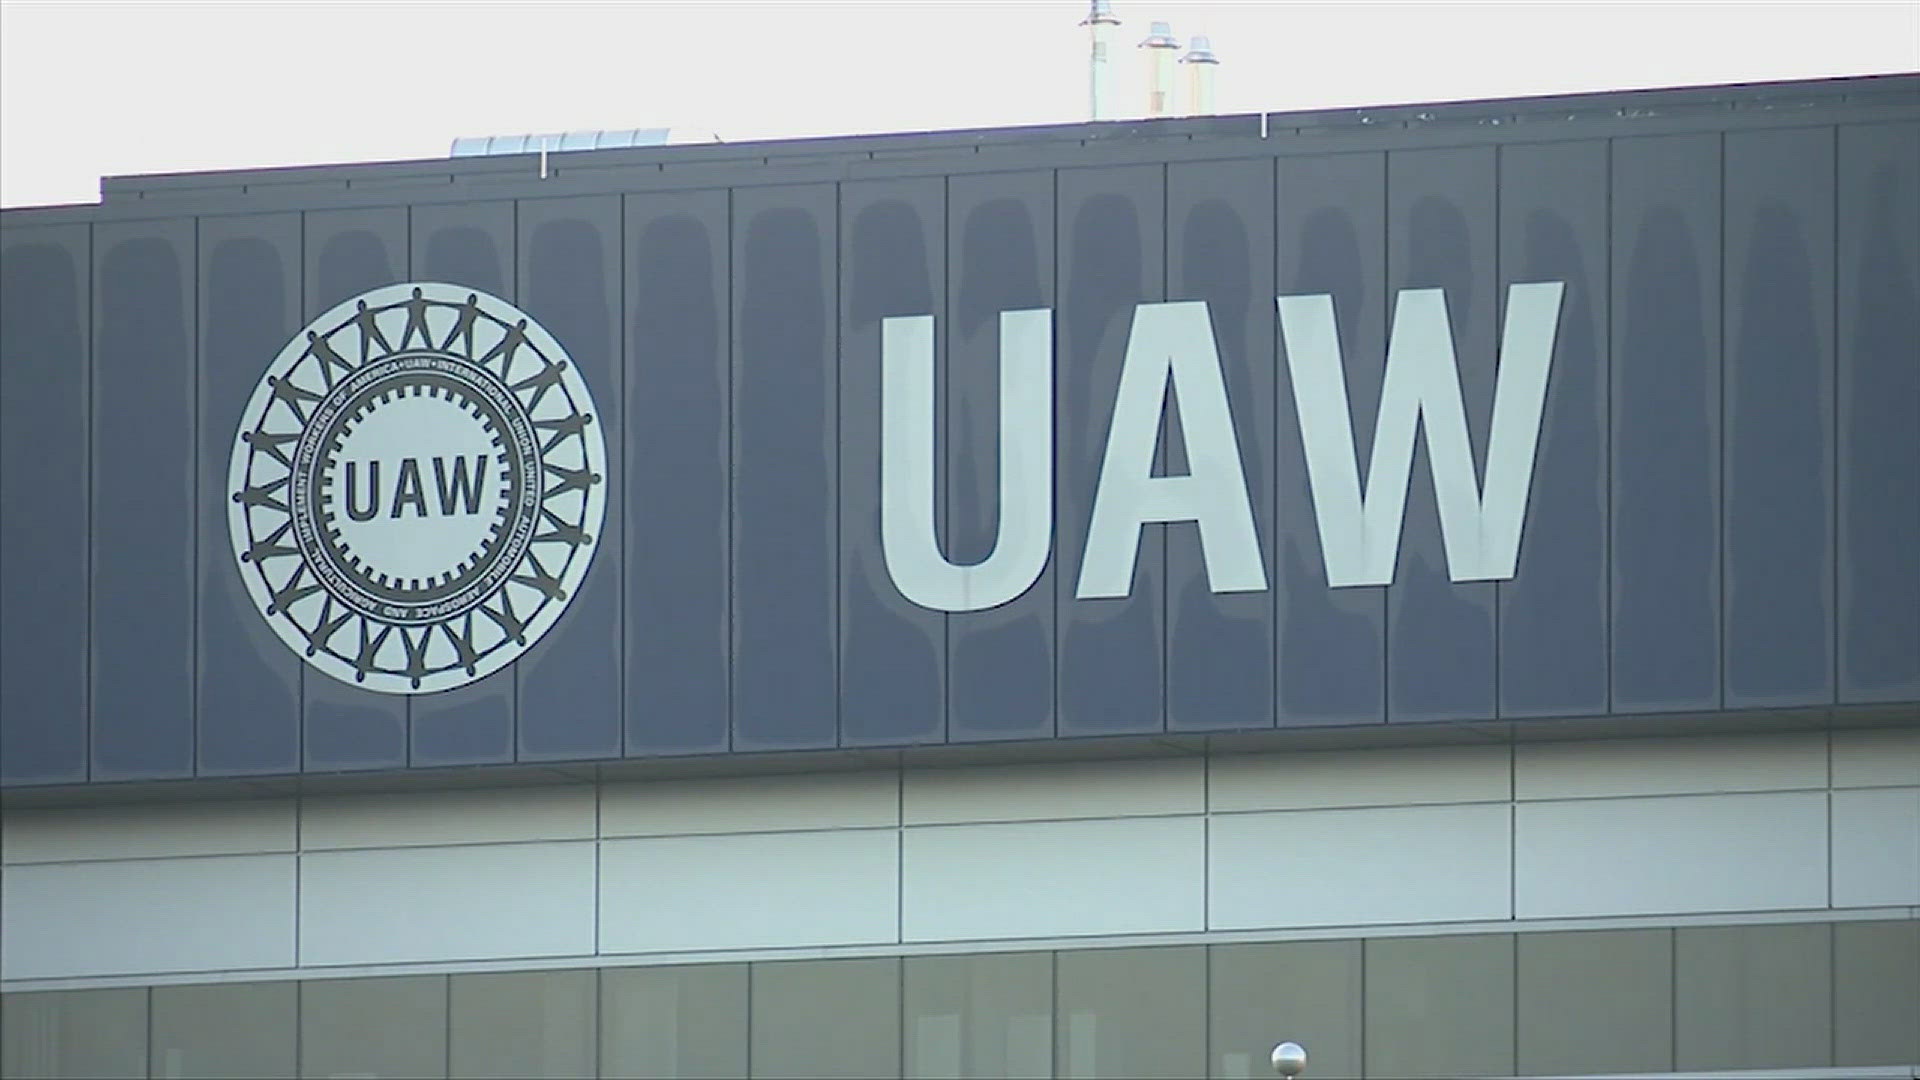 The UAW had wanted to further its organization in factories in the south after a successful vote to unionize in Tennessee.